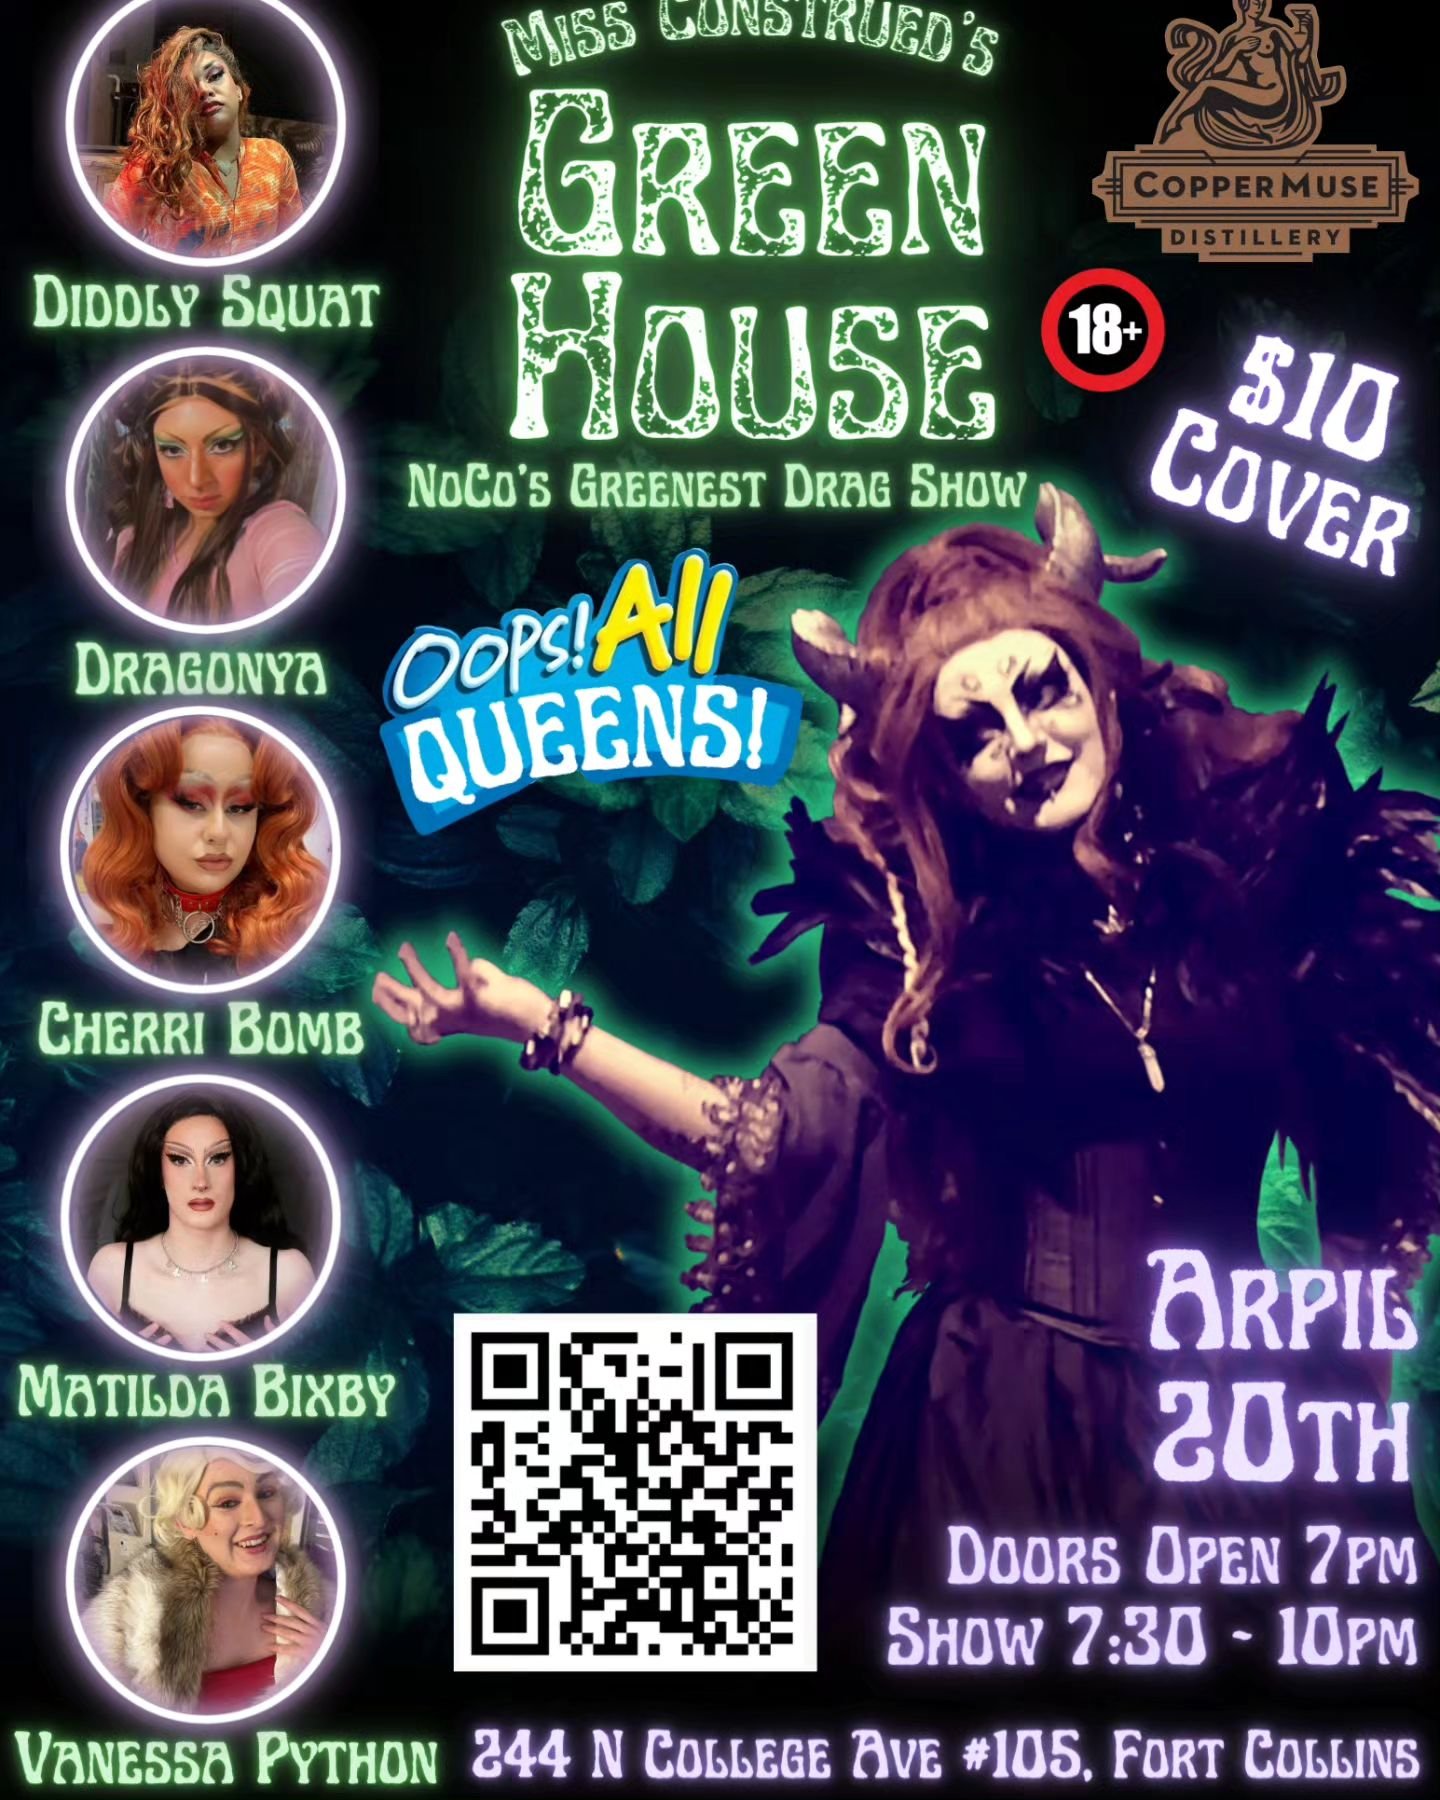 💚It's always a dope time with Miss Contstrued 💚

The last drag show sold out, so be sure to grab your tickets before they're all gone!